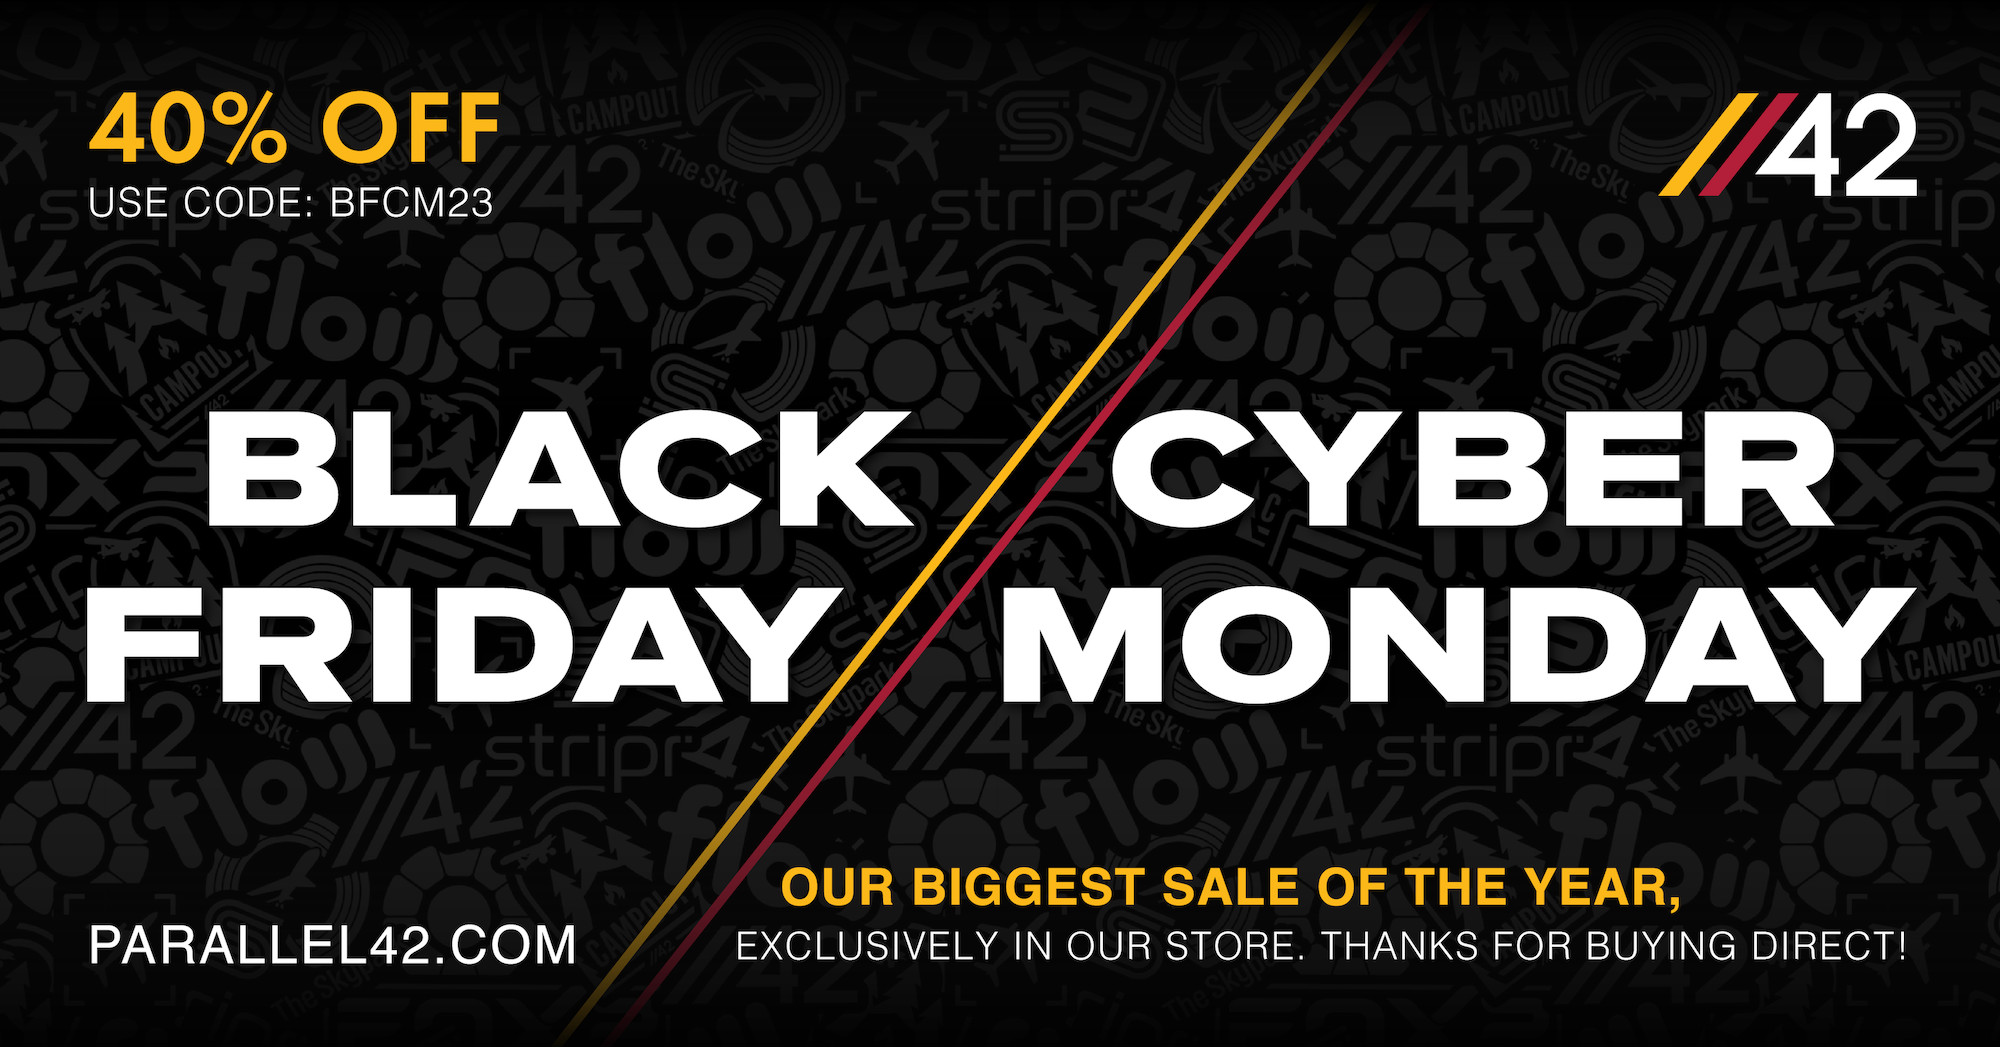 Our Black Friday // Cyber Monday sale has started, don't miss out!